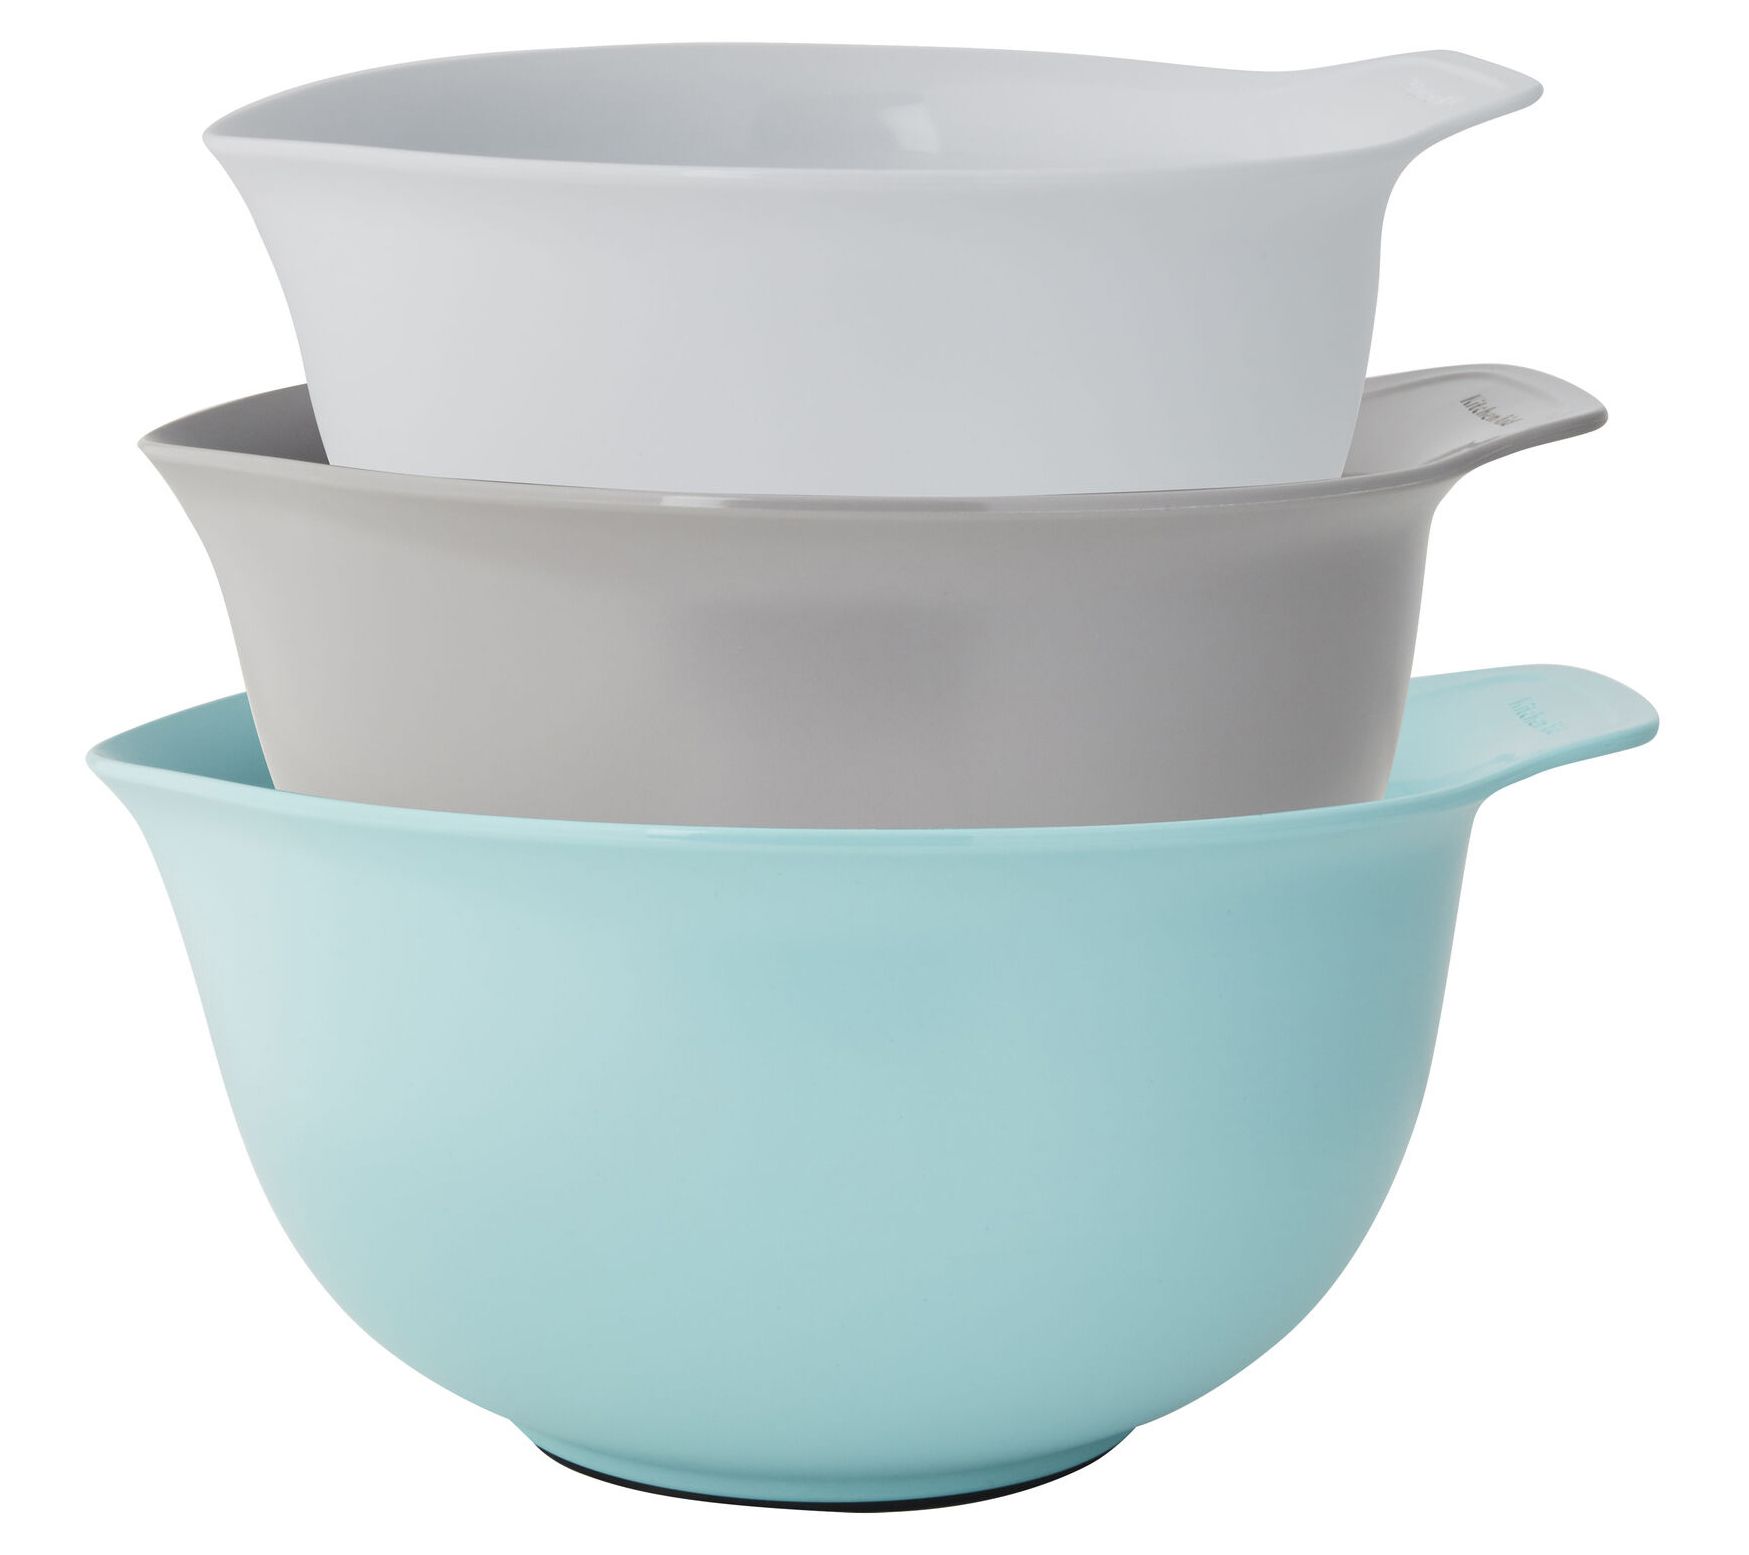 OXO 3pc Insulated Stainless Steel Mixing Bowl Set - Gray